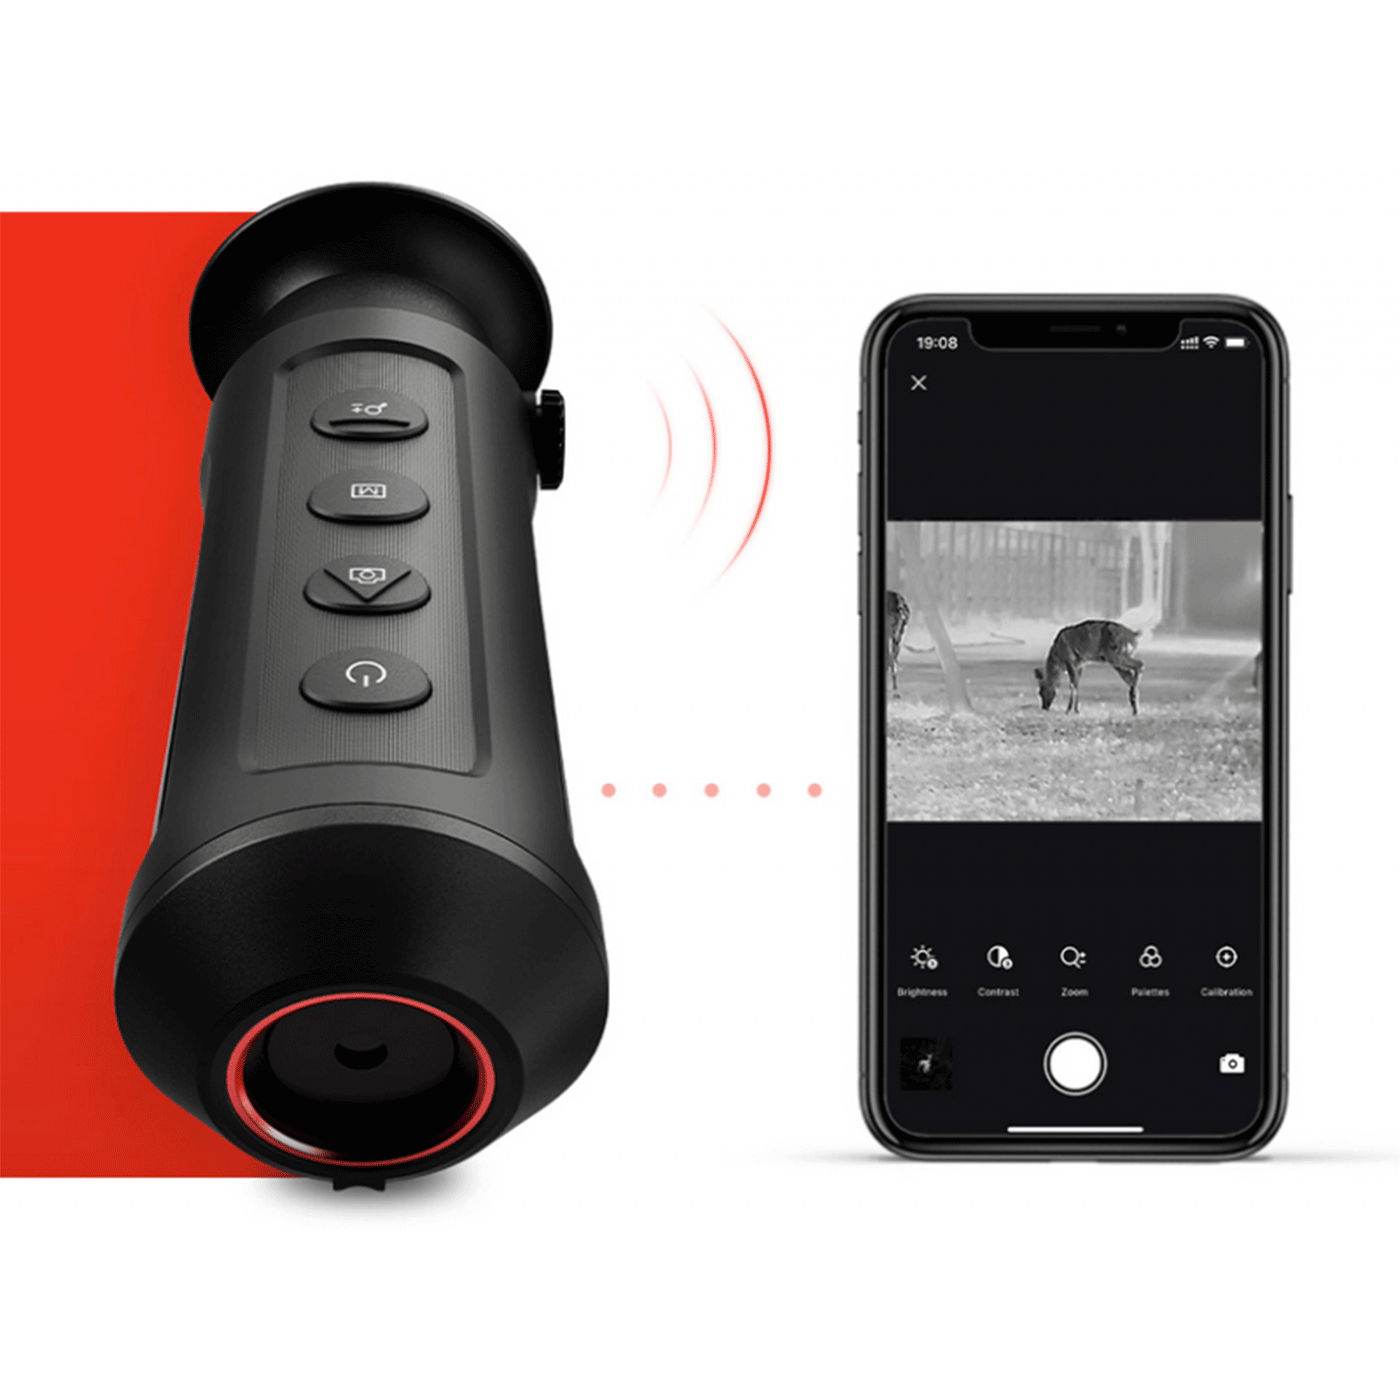 THERMAL MONOCULAR - HIKMICRO - LYNX S PRO LE15S